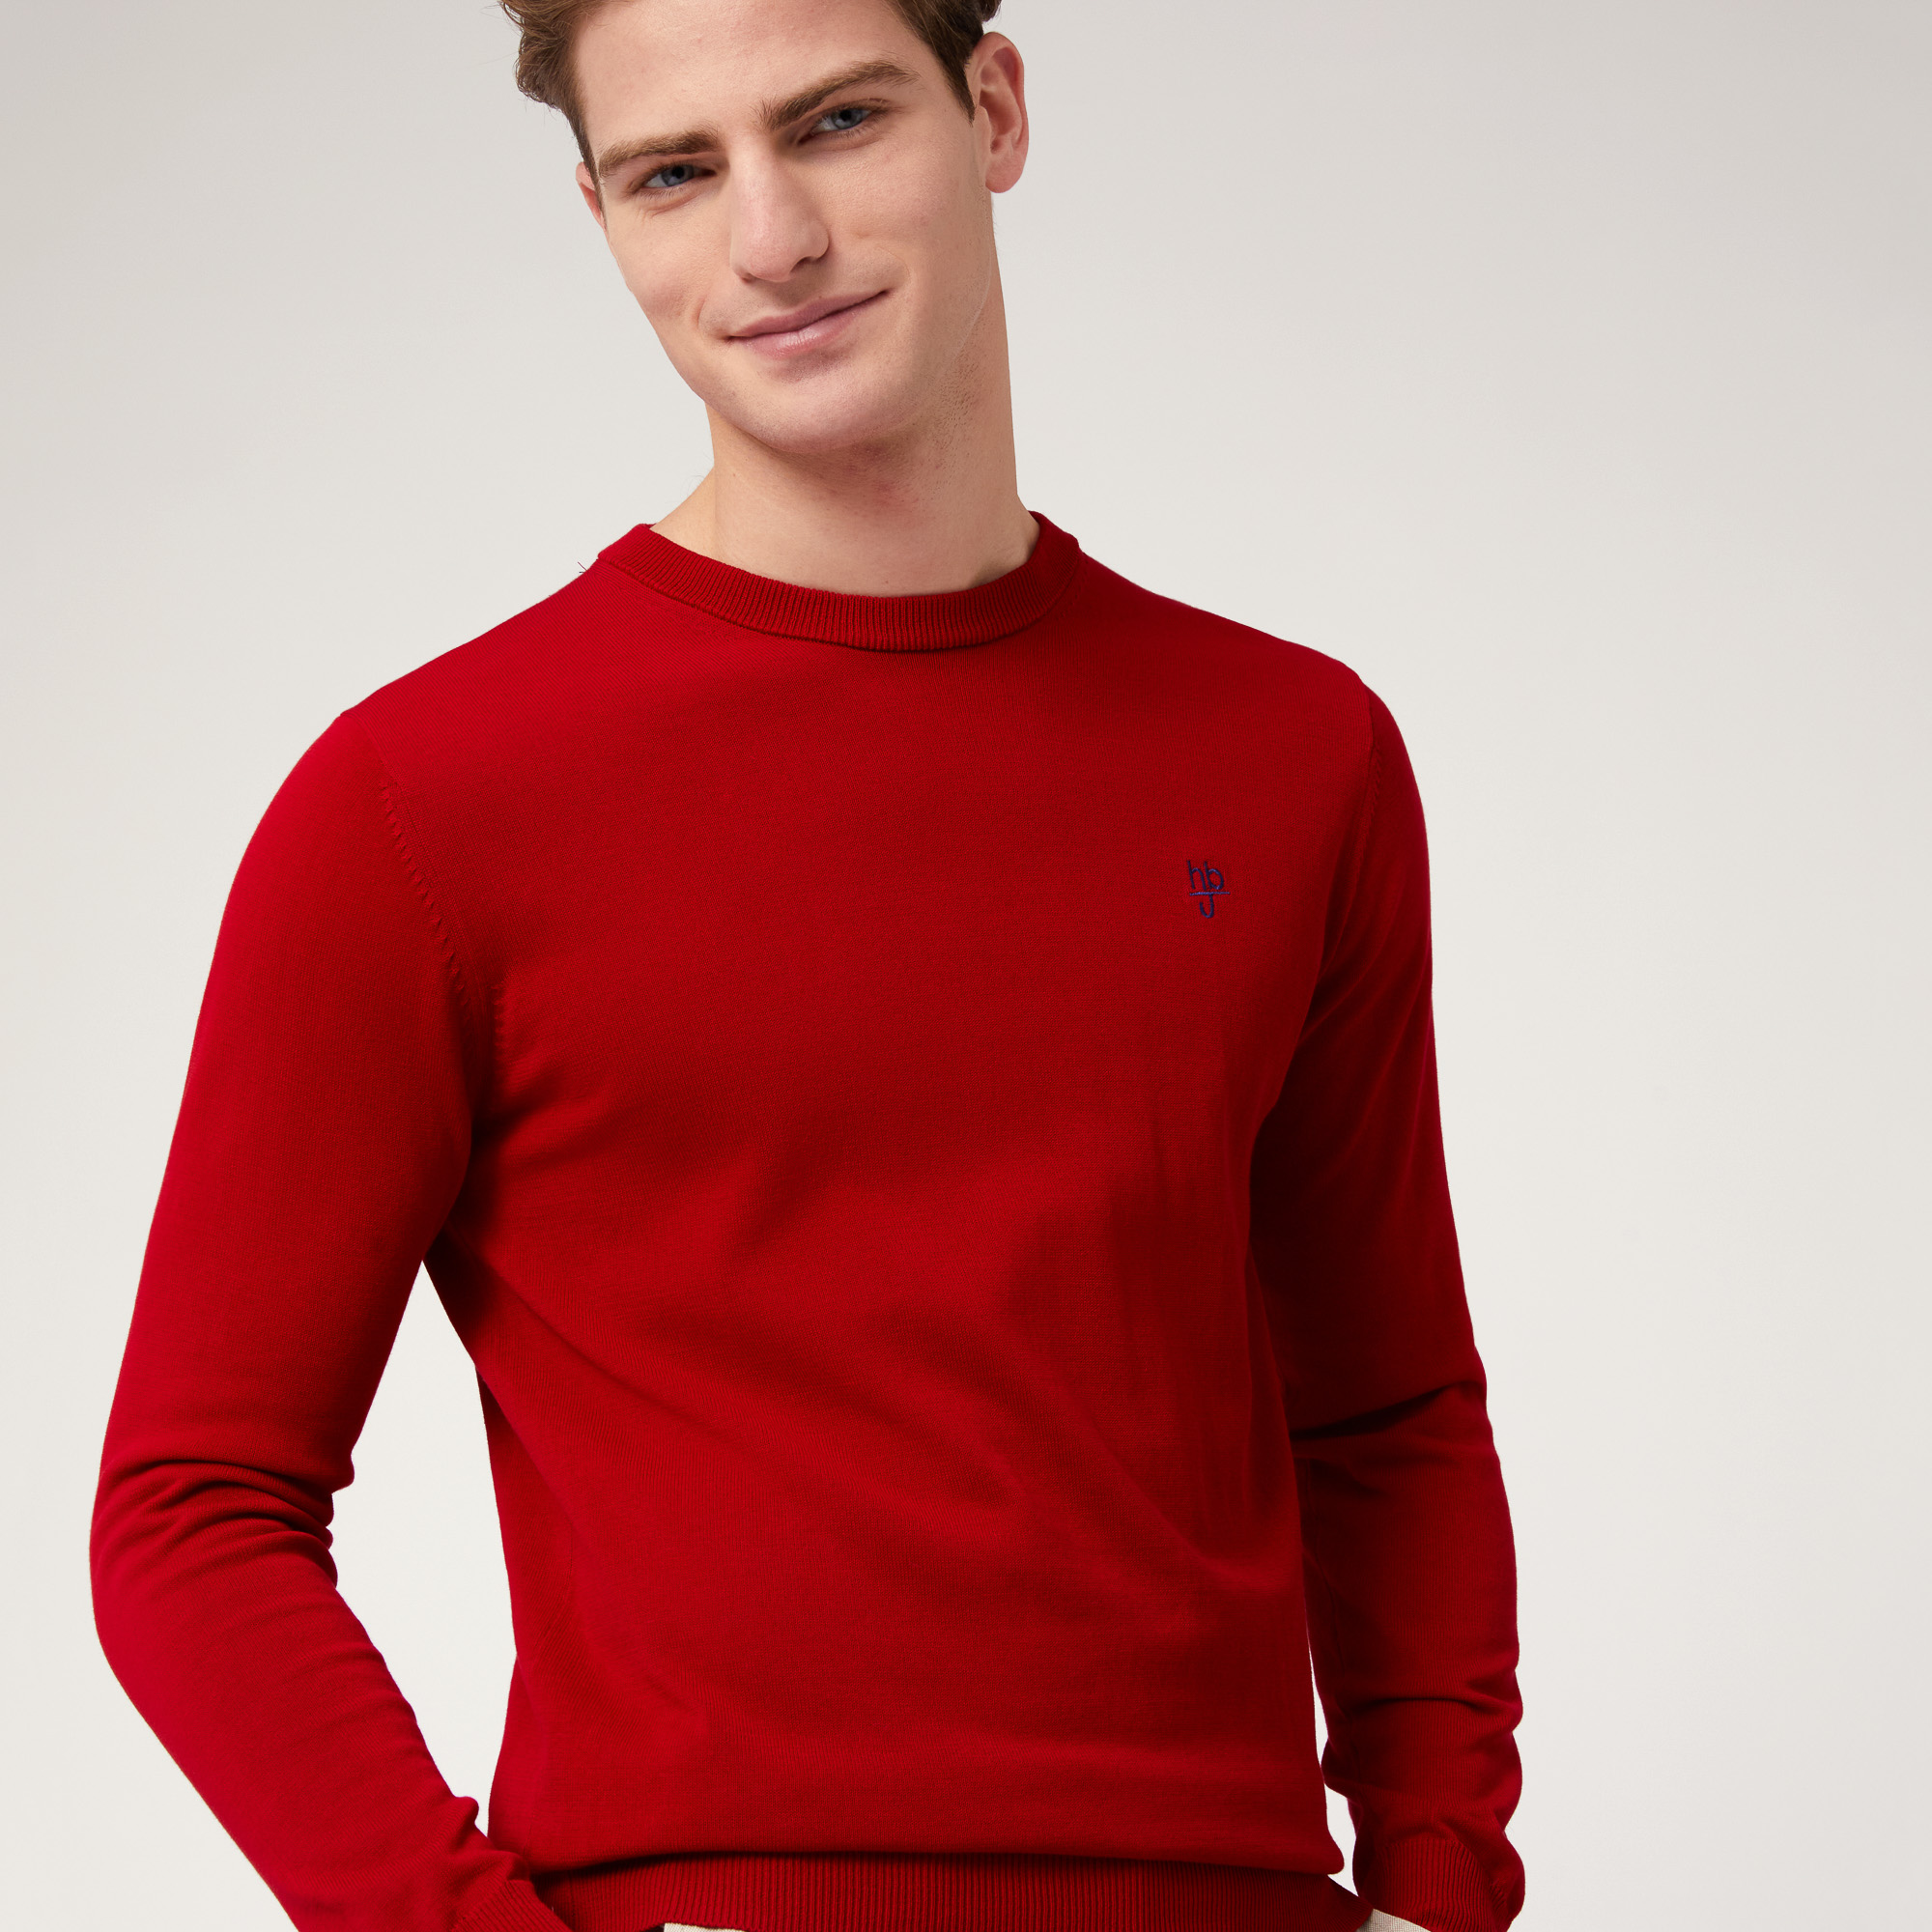 Pullover Girocollo In Cotone, Rosso, large image number 2